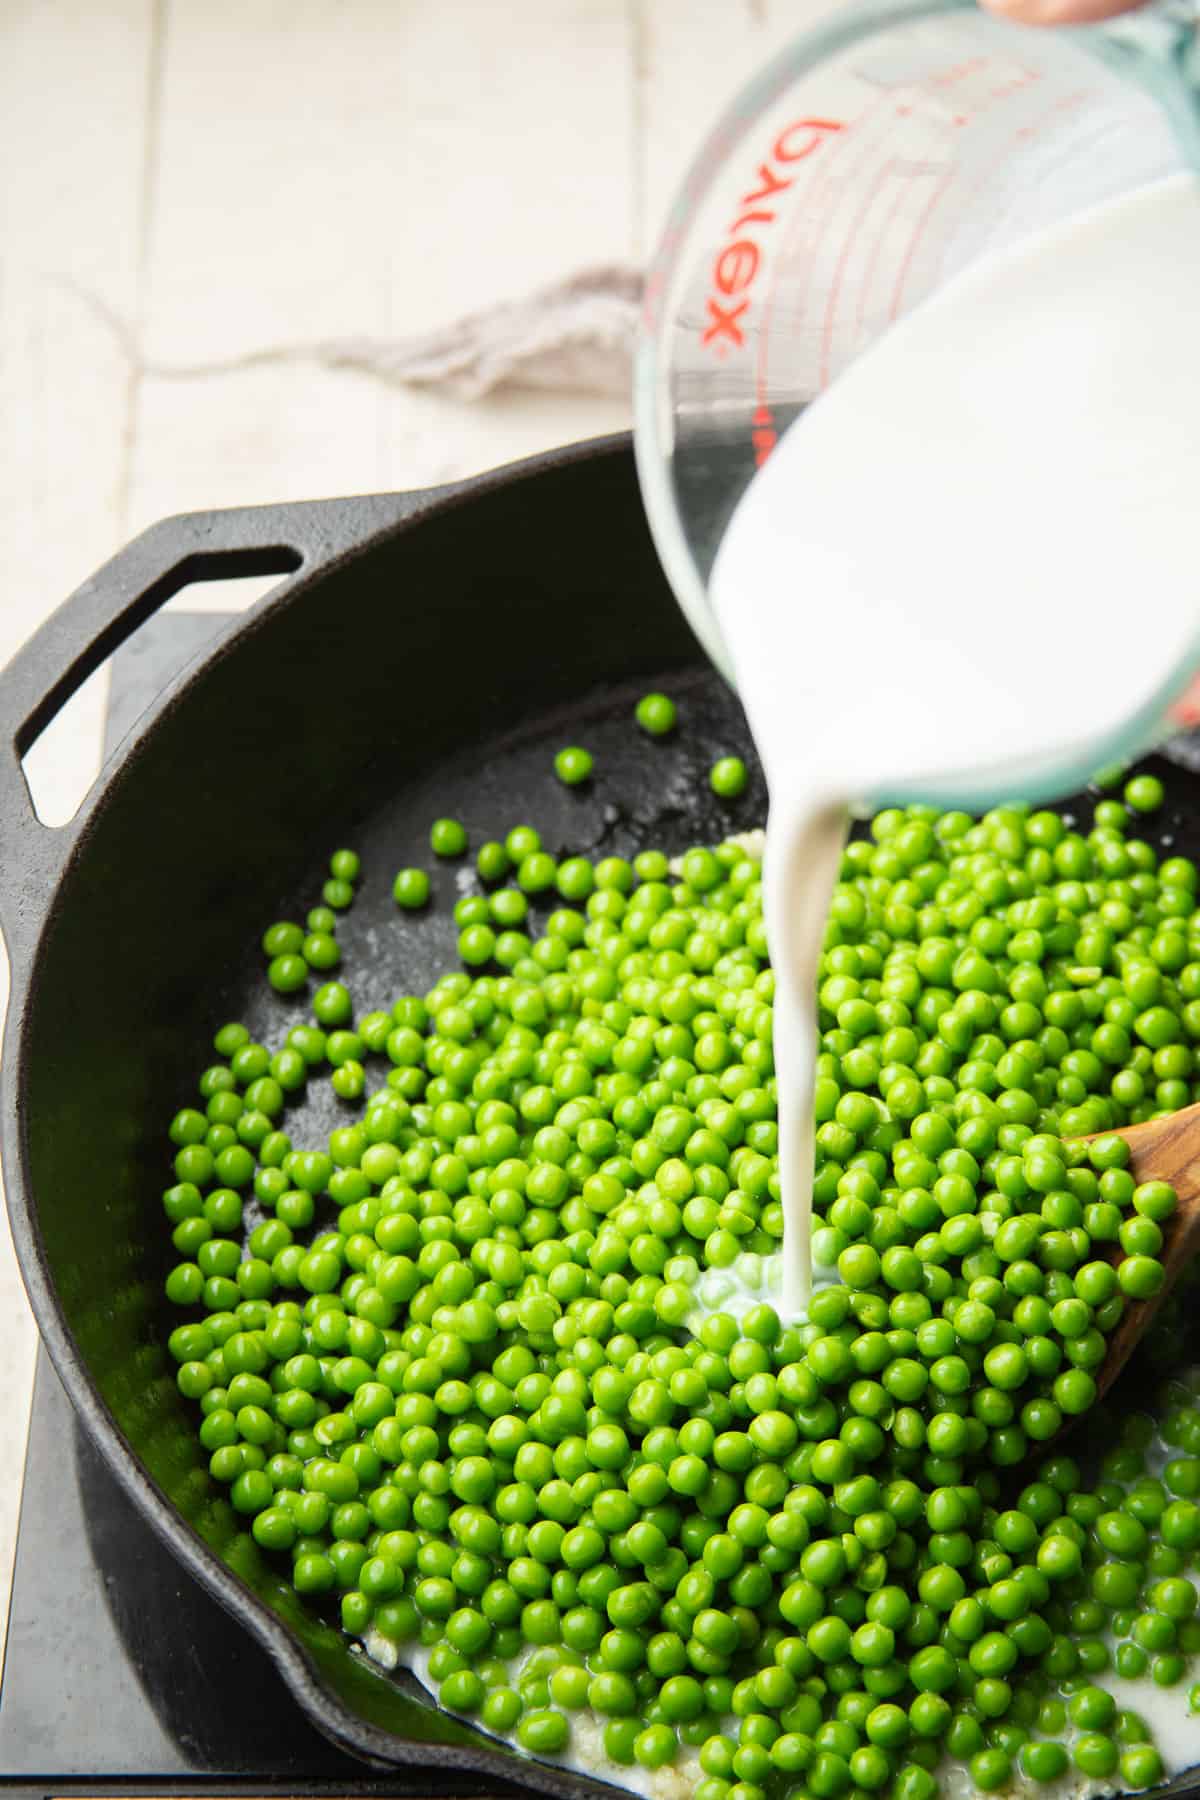 Coconut milk being poured into a skillet filled with peas.